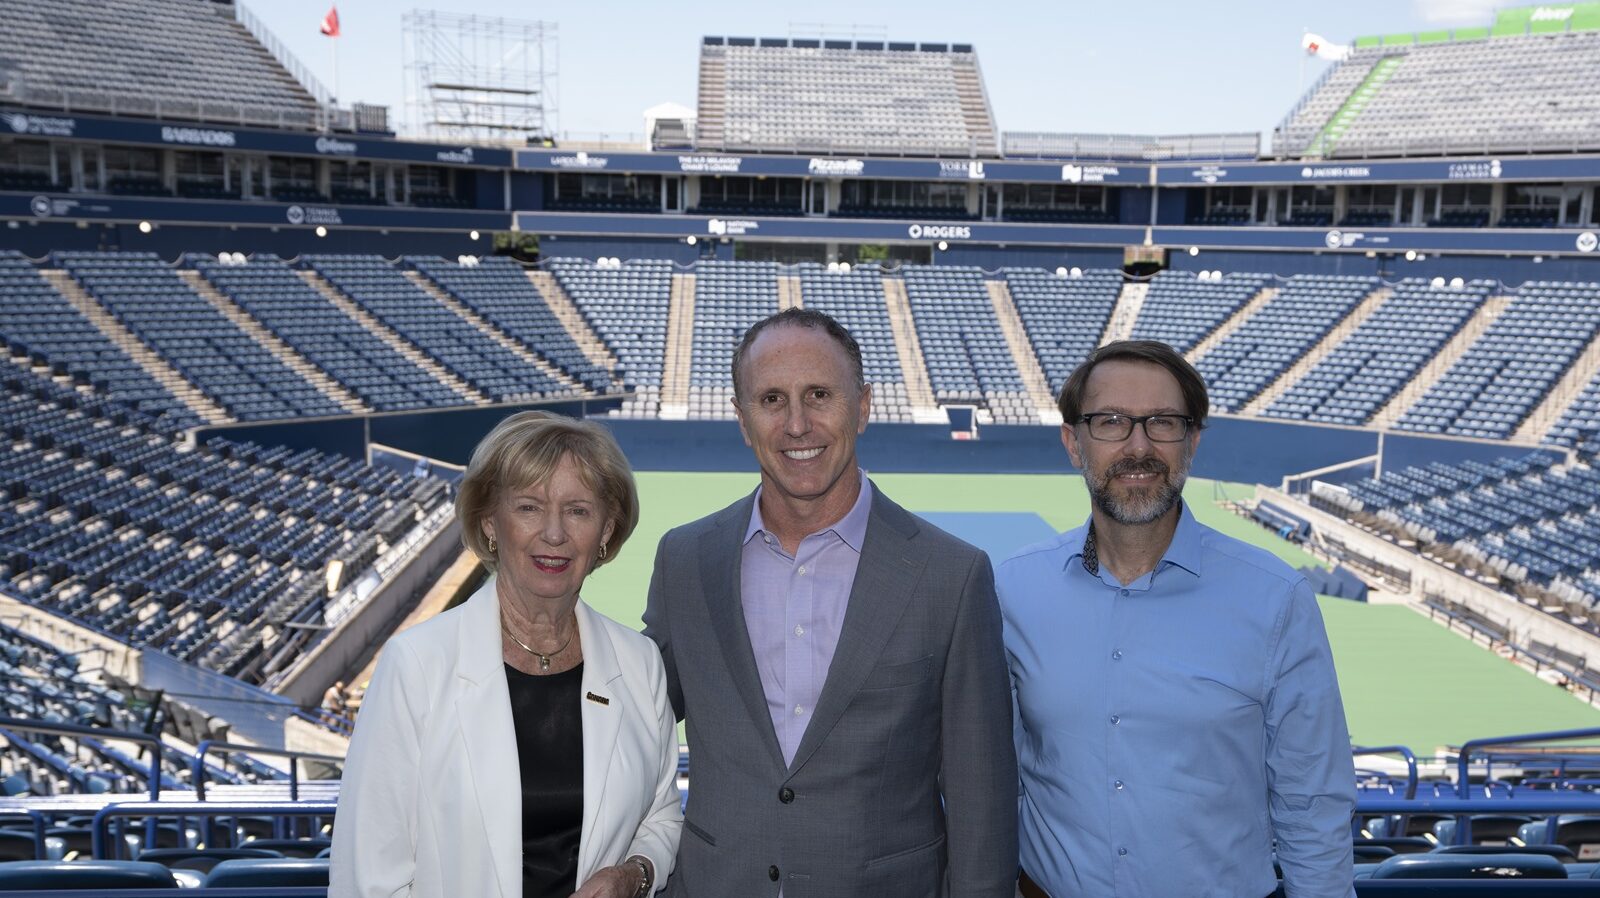 Tennis Canada receives Government of Canada support for National Bank Open presented by Rogers in Toronto